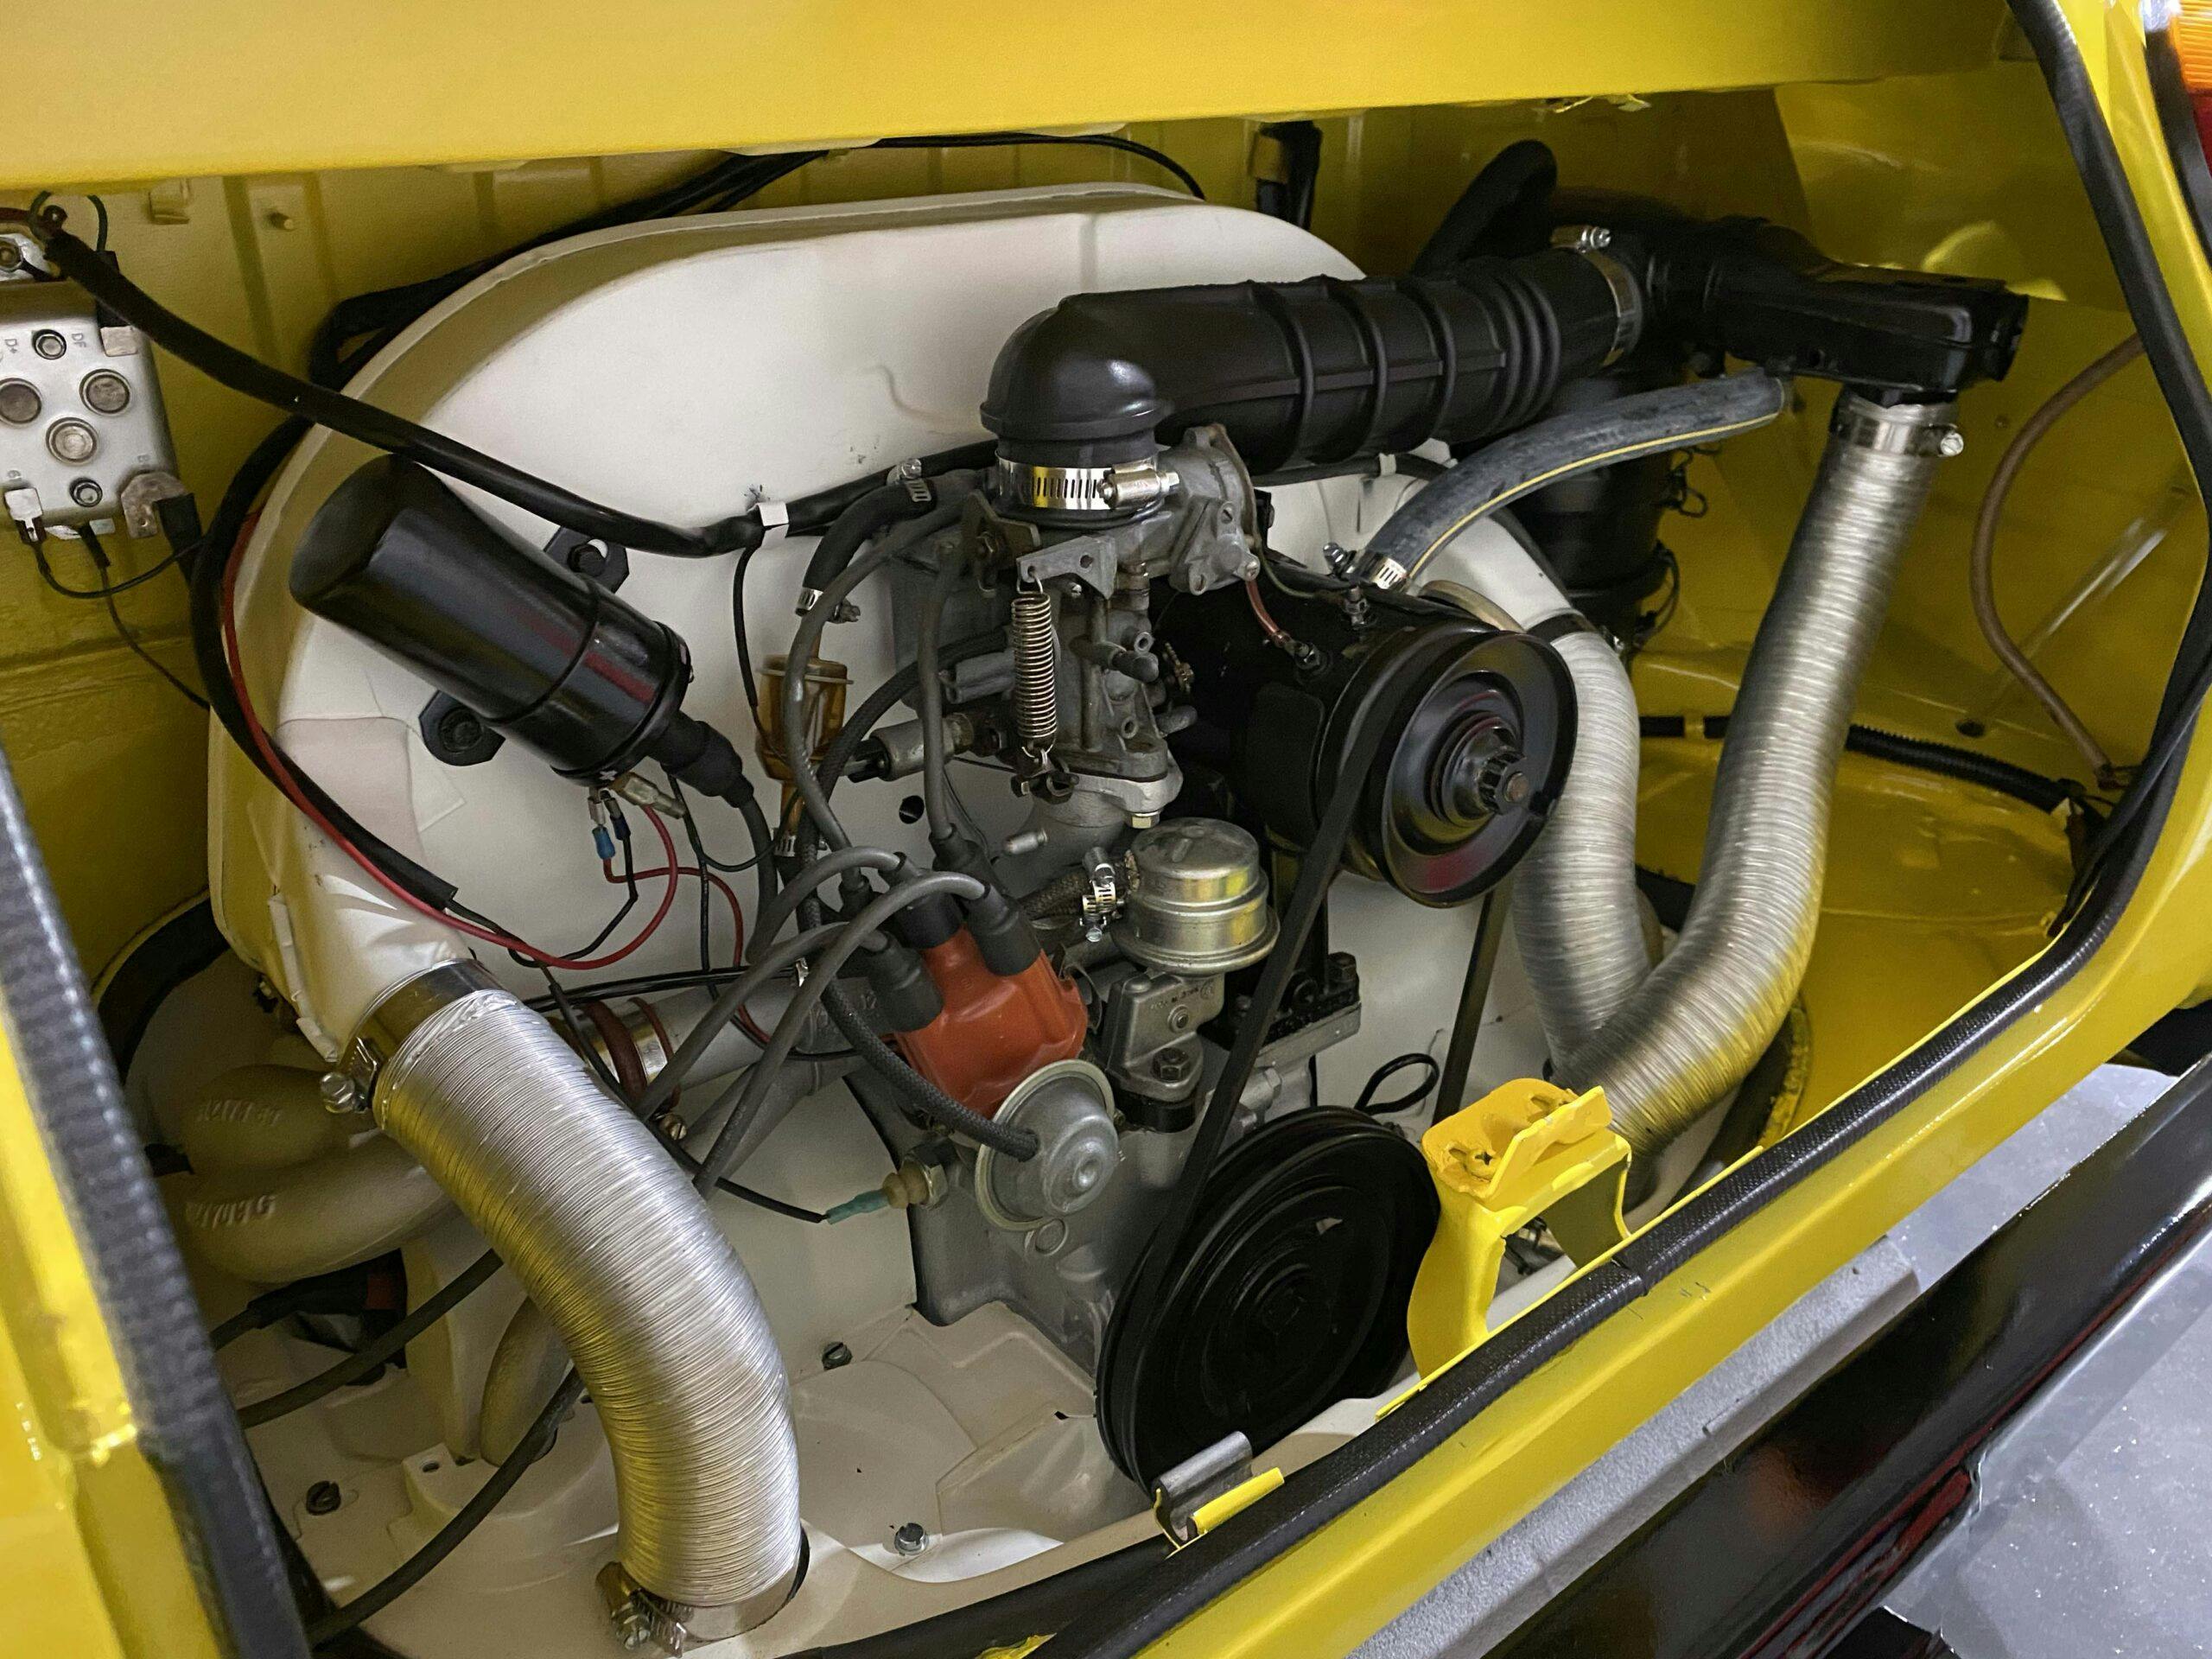 1974 Volkswagen Type 181 Thing engine angle